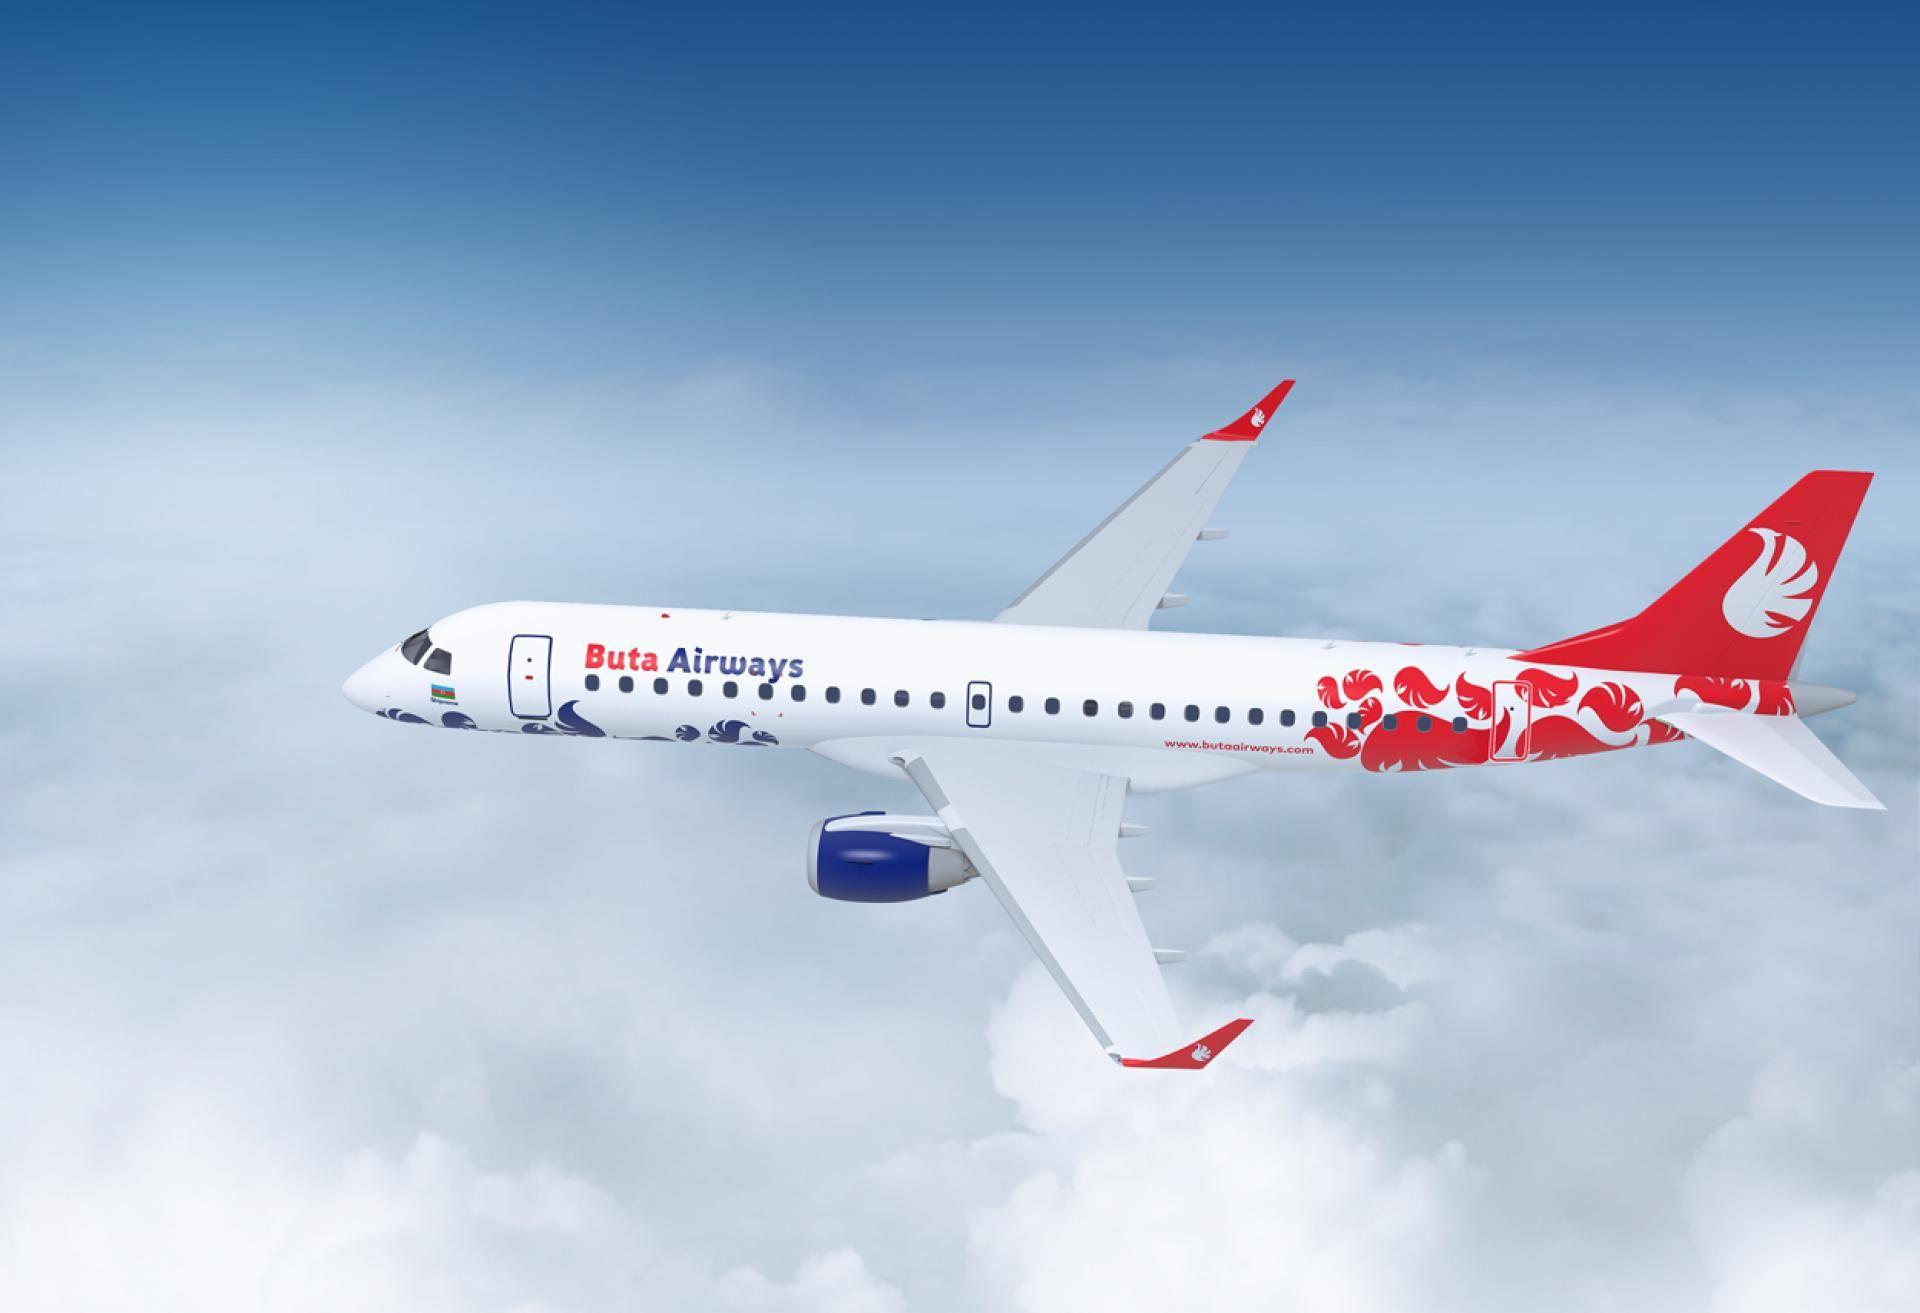 Airline Liveries and Logo - BUTA AIRWAYS livery and logo approved